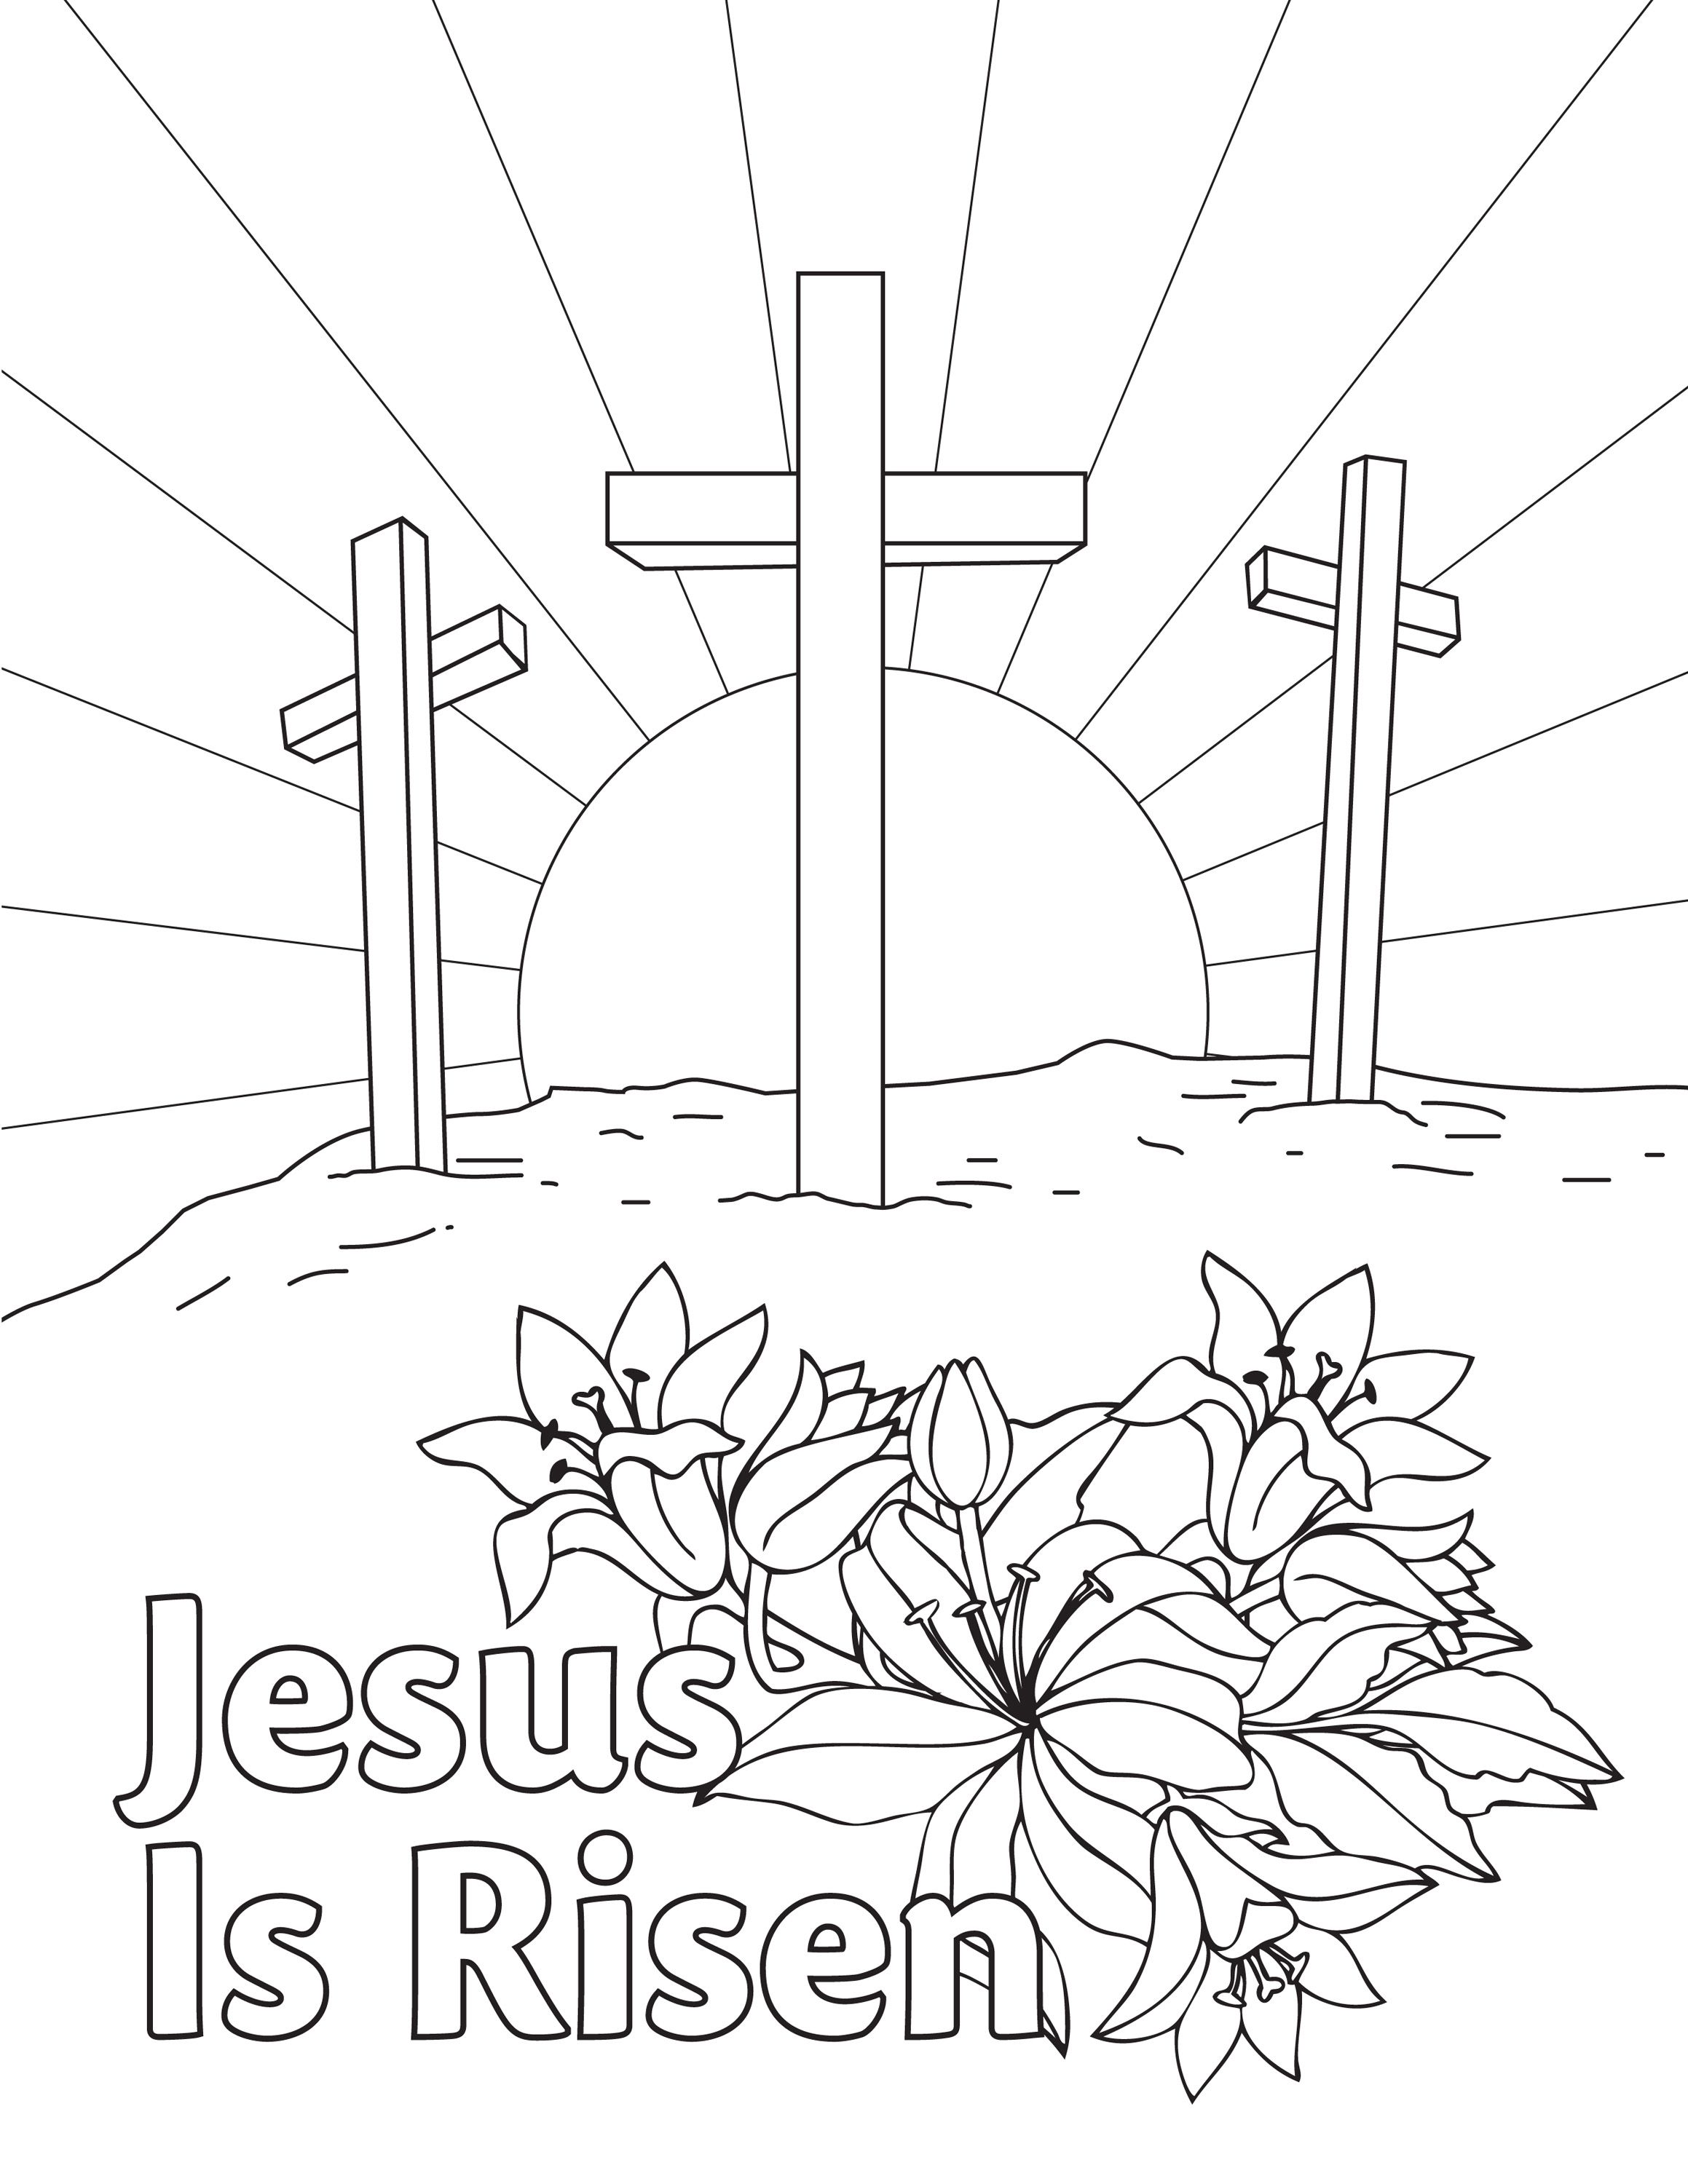 Free easter coloring page downloadable printable from aop jesus is risen homeschoolingâ easter coloring sheets free easter coloring pages jesus coloring pages